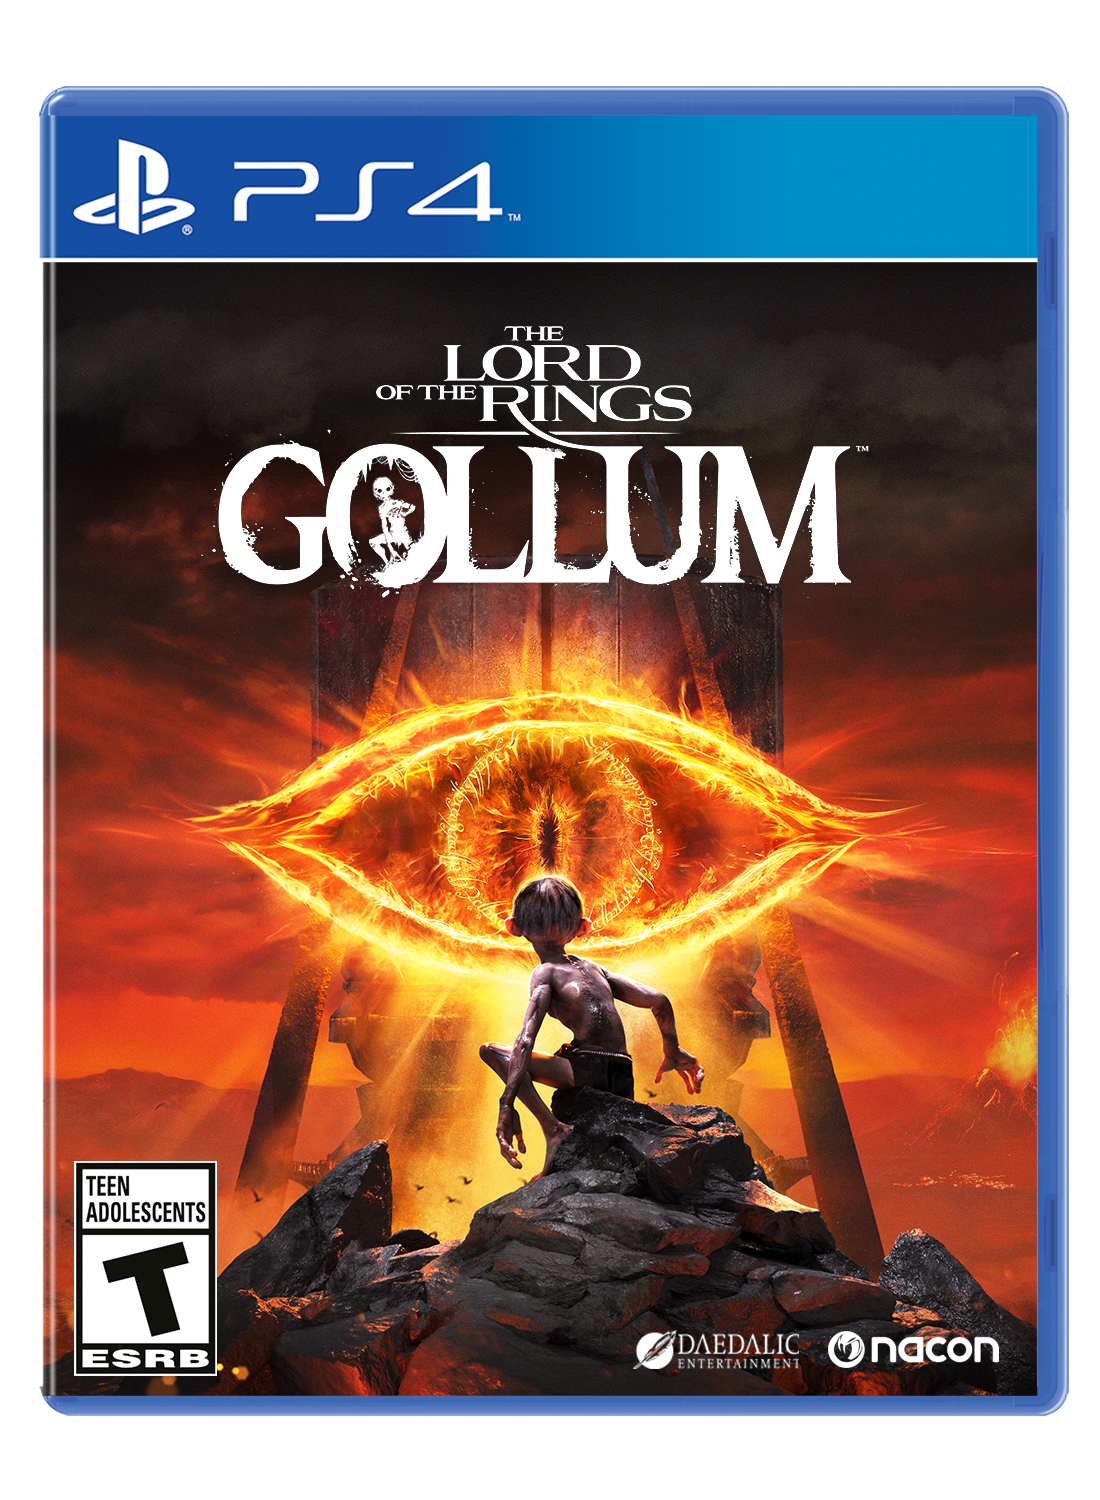 The Lord Of The Rings: Gollum Is Coming To Nintendo Switch, PS4, & Xbox One